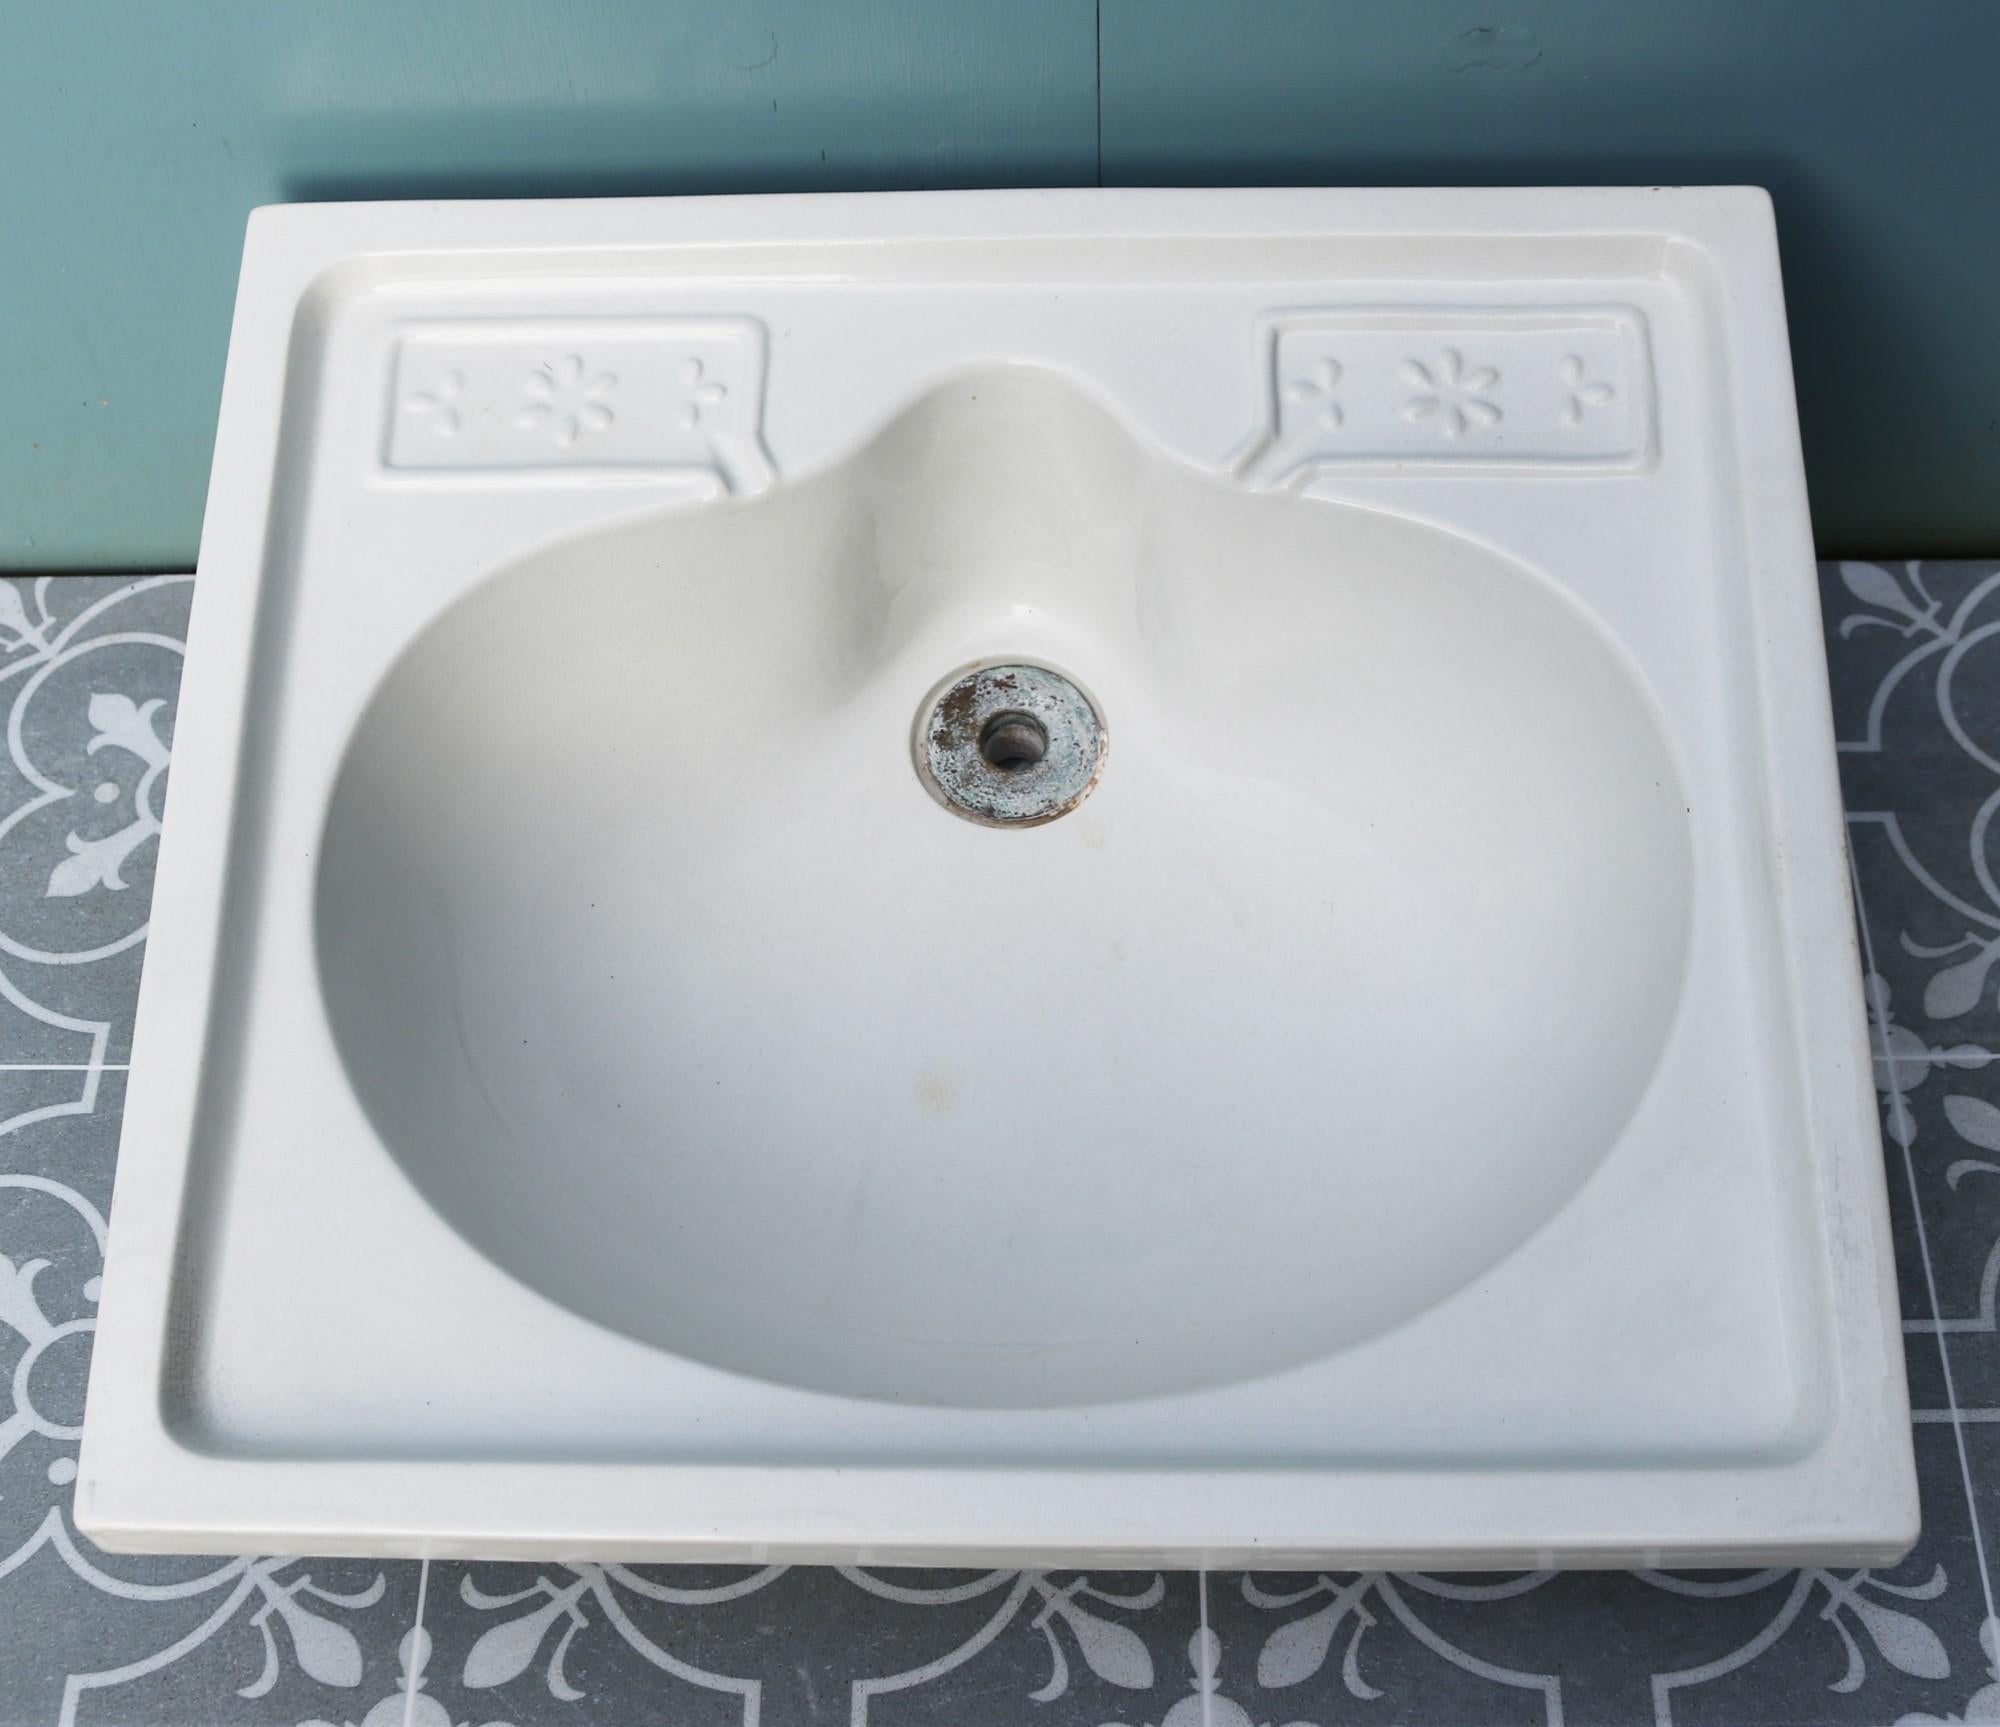 A pretty late 19th century wash basin with soap dishes. For use with wall or surface mounted taps.